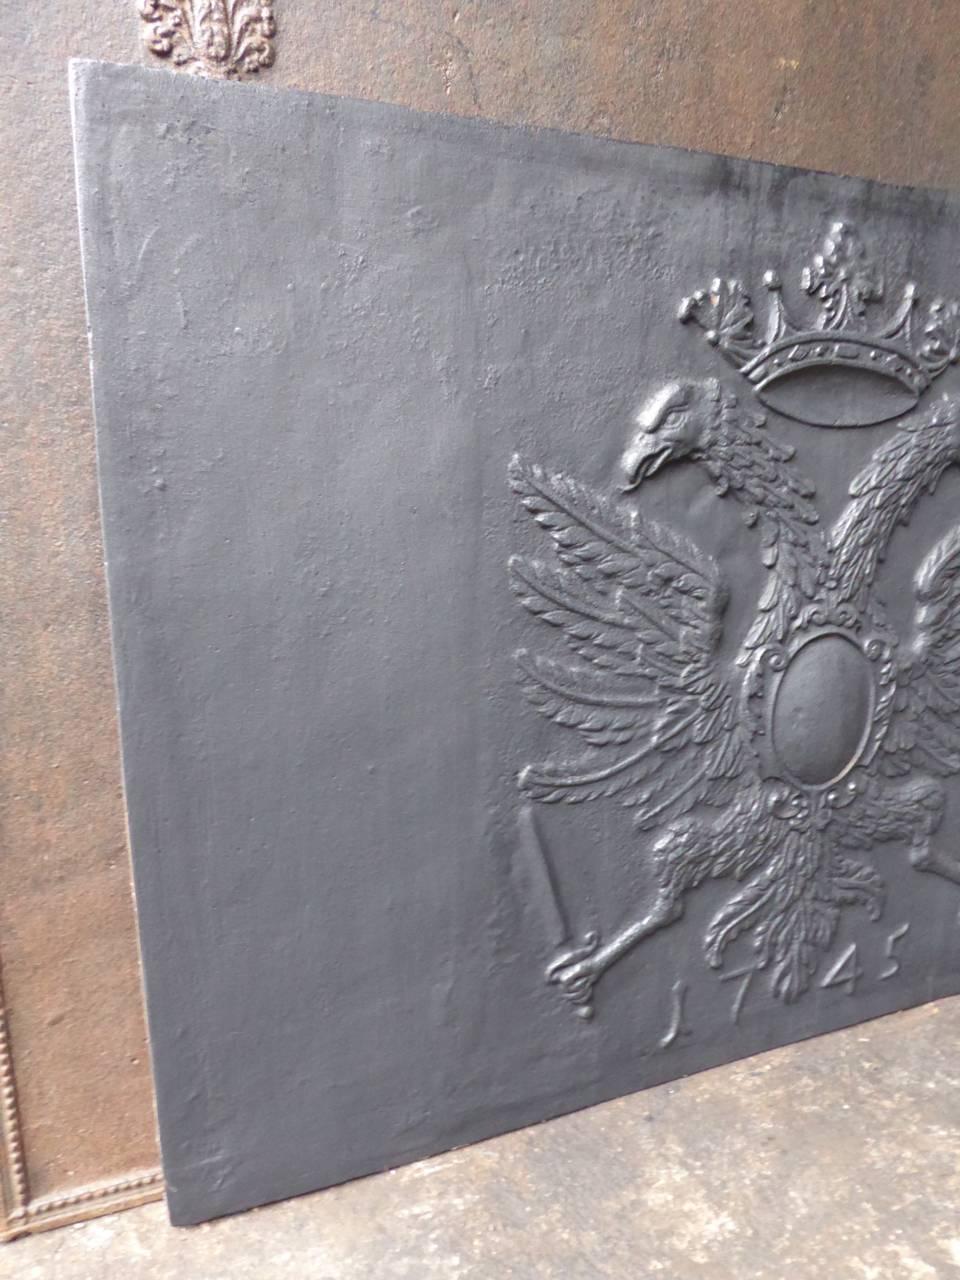 Fireback with a coat of arms consisting of two eagles and a crown.

We have a unique and specialized collection of antique and used fireplace accessories consisting of more than 1000 listings at 1stdibs. Amongst others we always have 300+